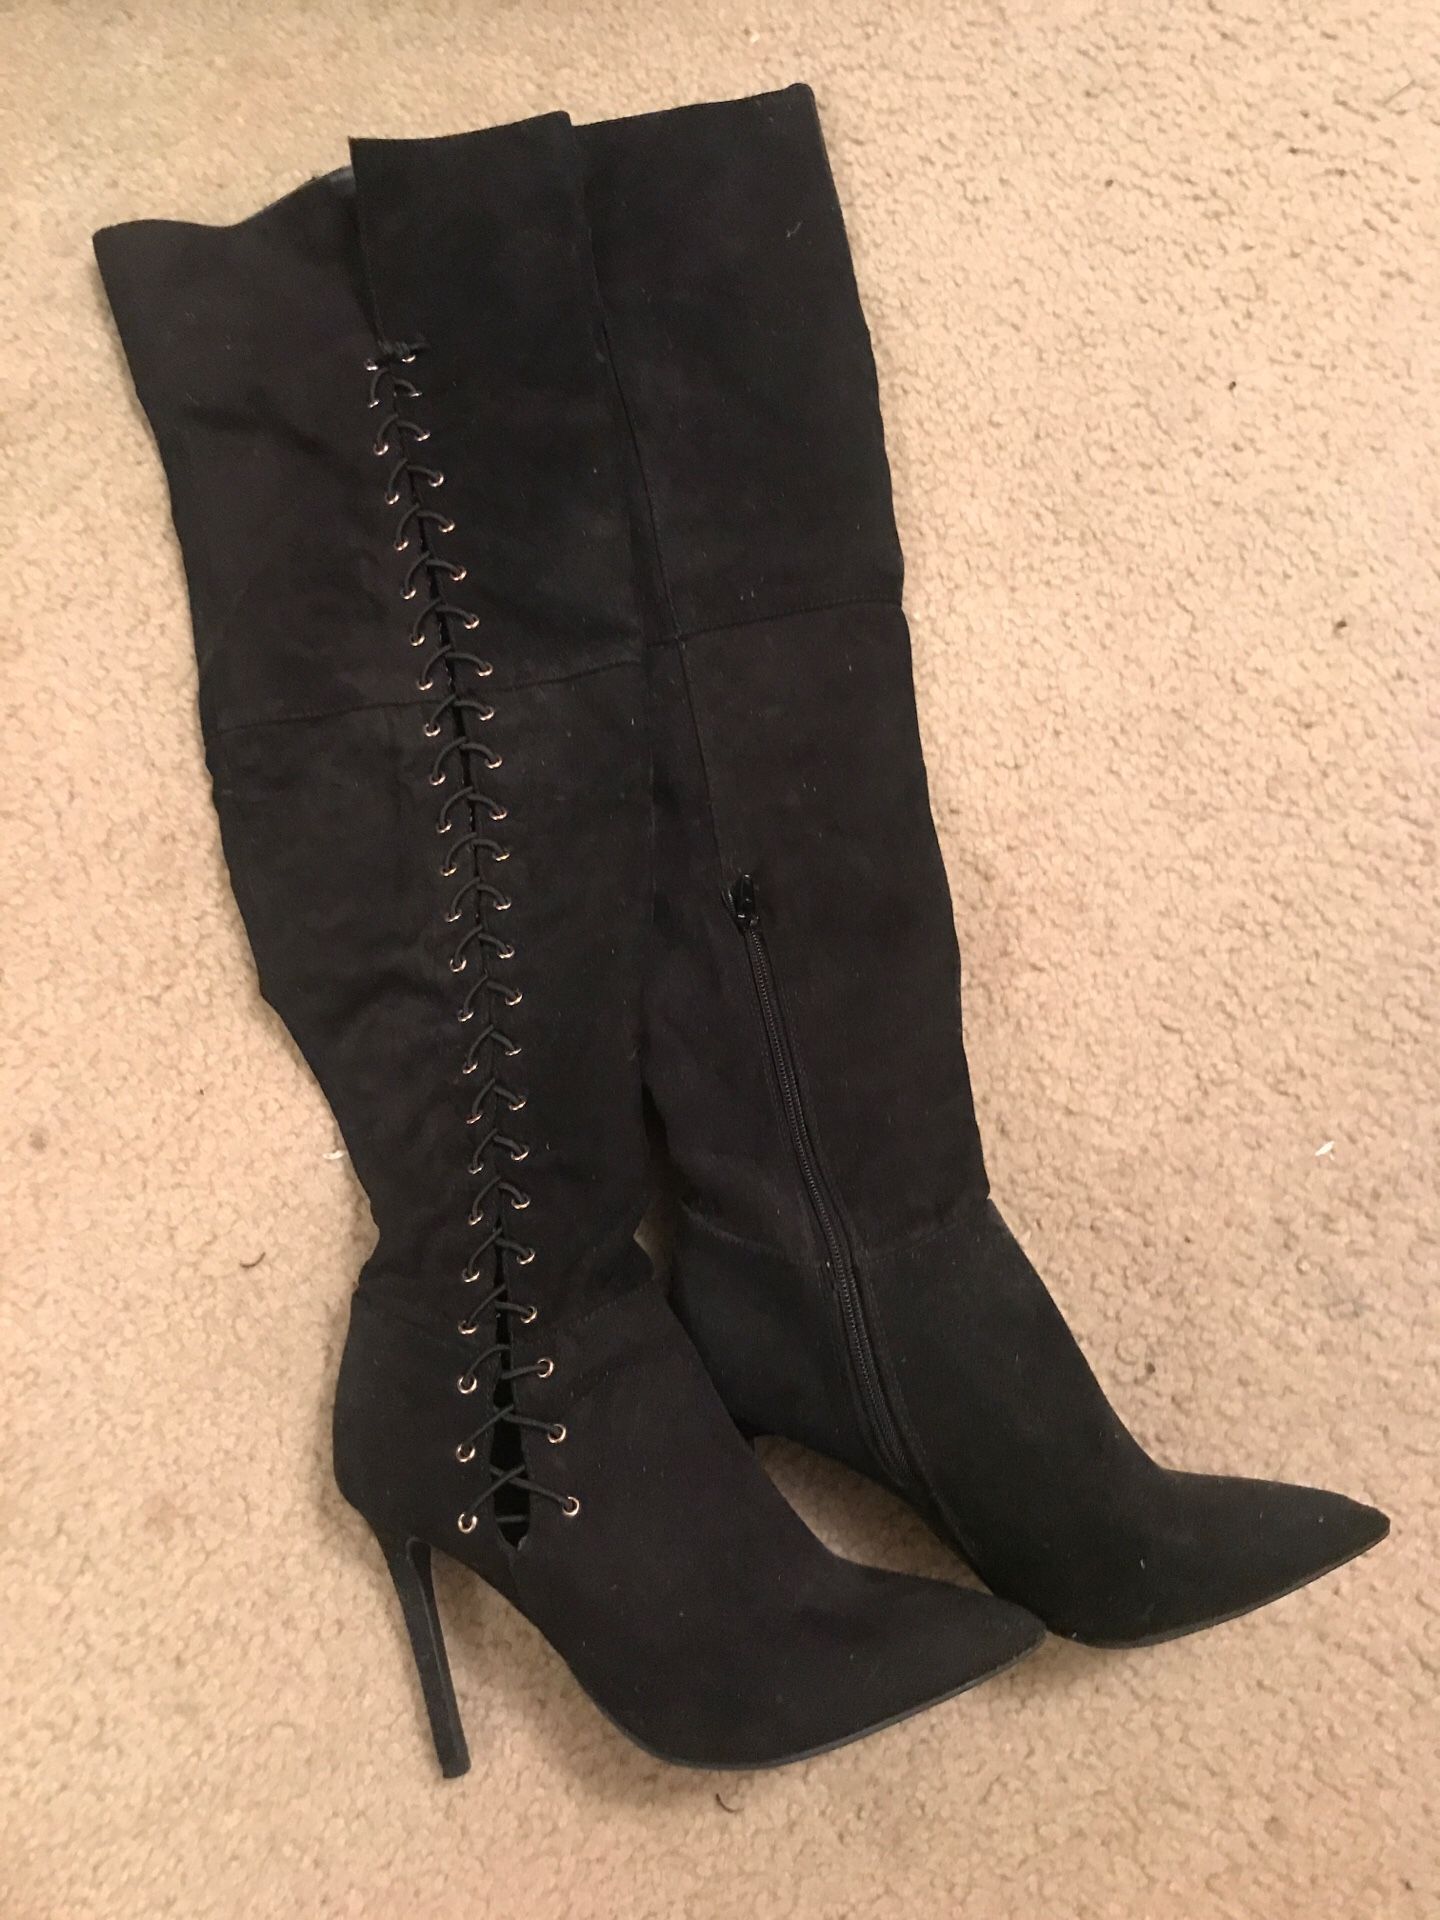 Women’s thigh-high black suede lace up boots